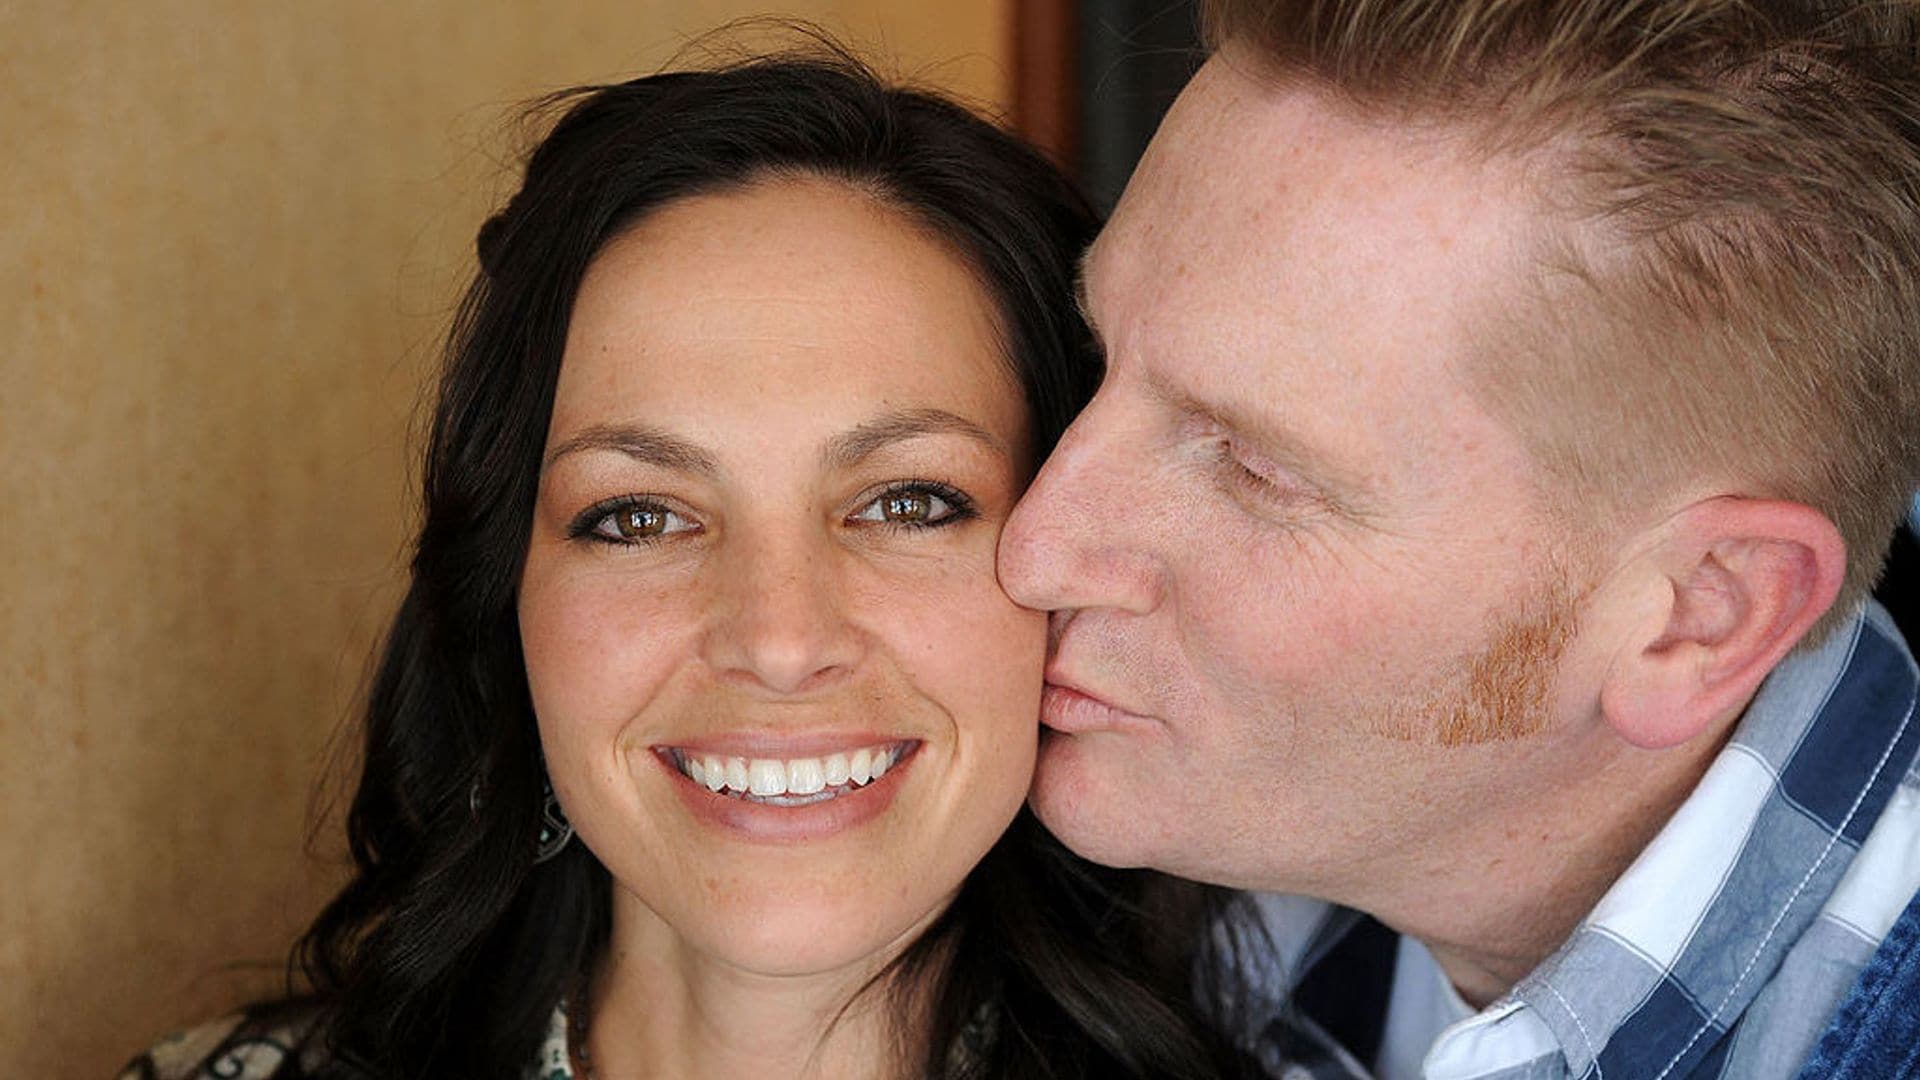 Joey Feek and Rory prepare for the Grammys and Valentine's Day